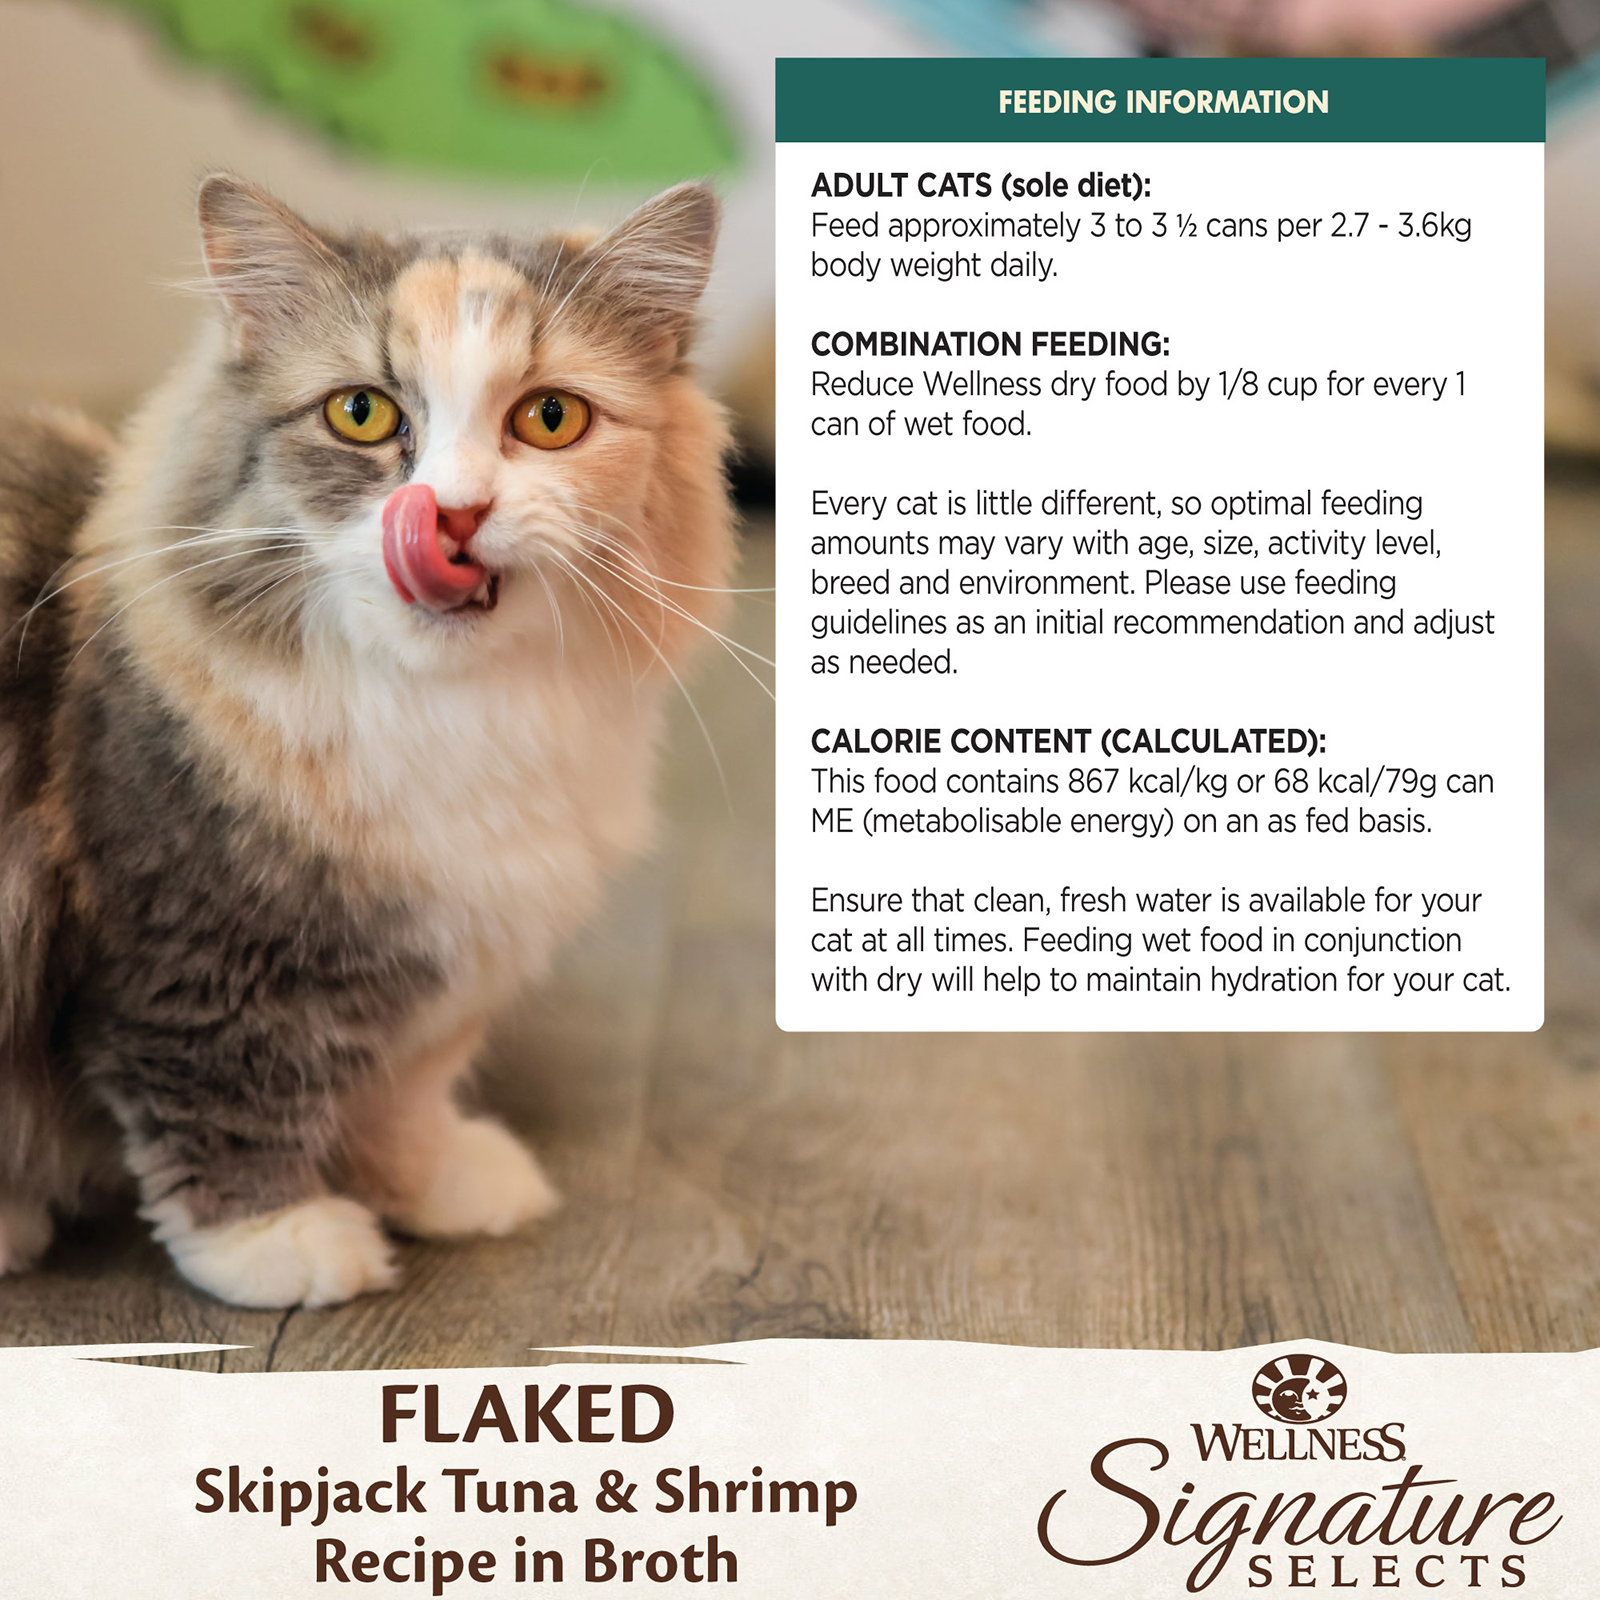 Wellness CORE Signature Selects Cat Food Can Adult Flaked Skipjack Tuna & Shrimp Entreé